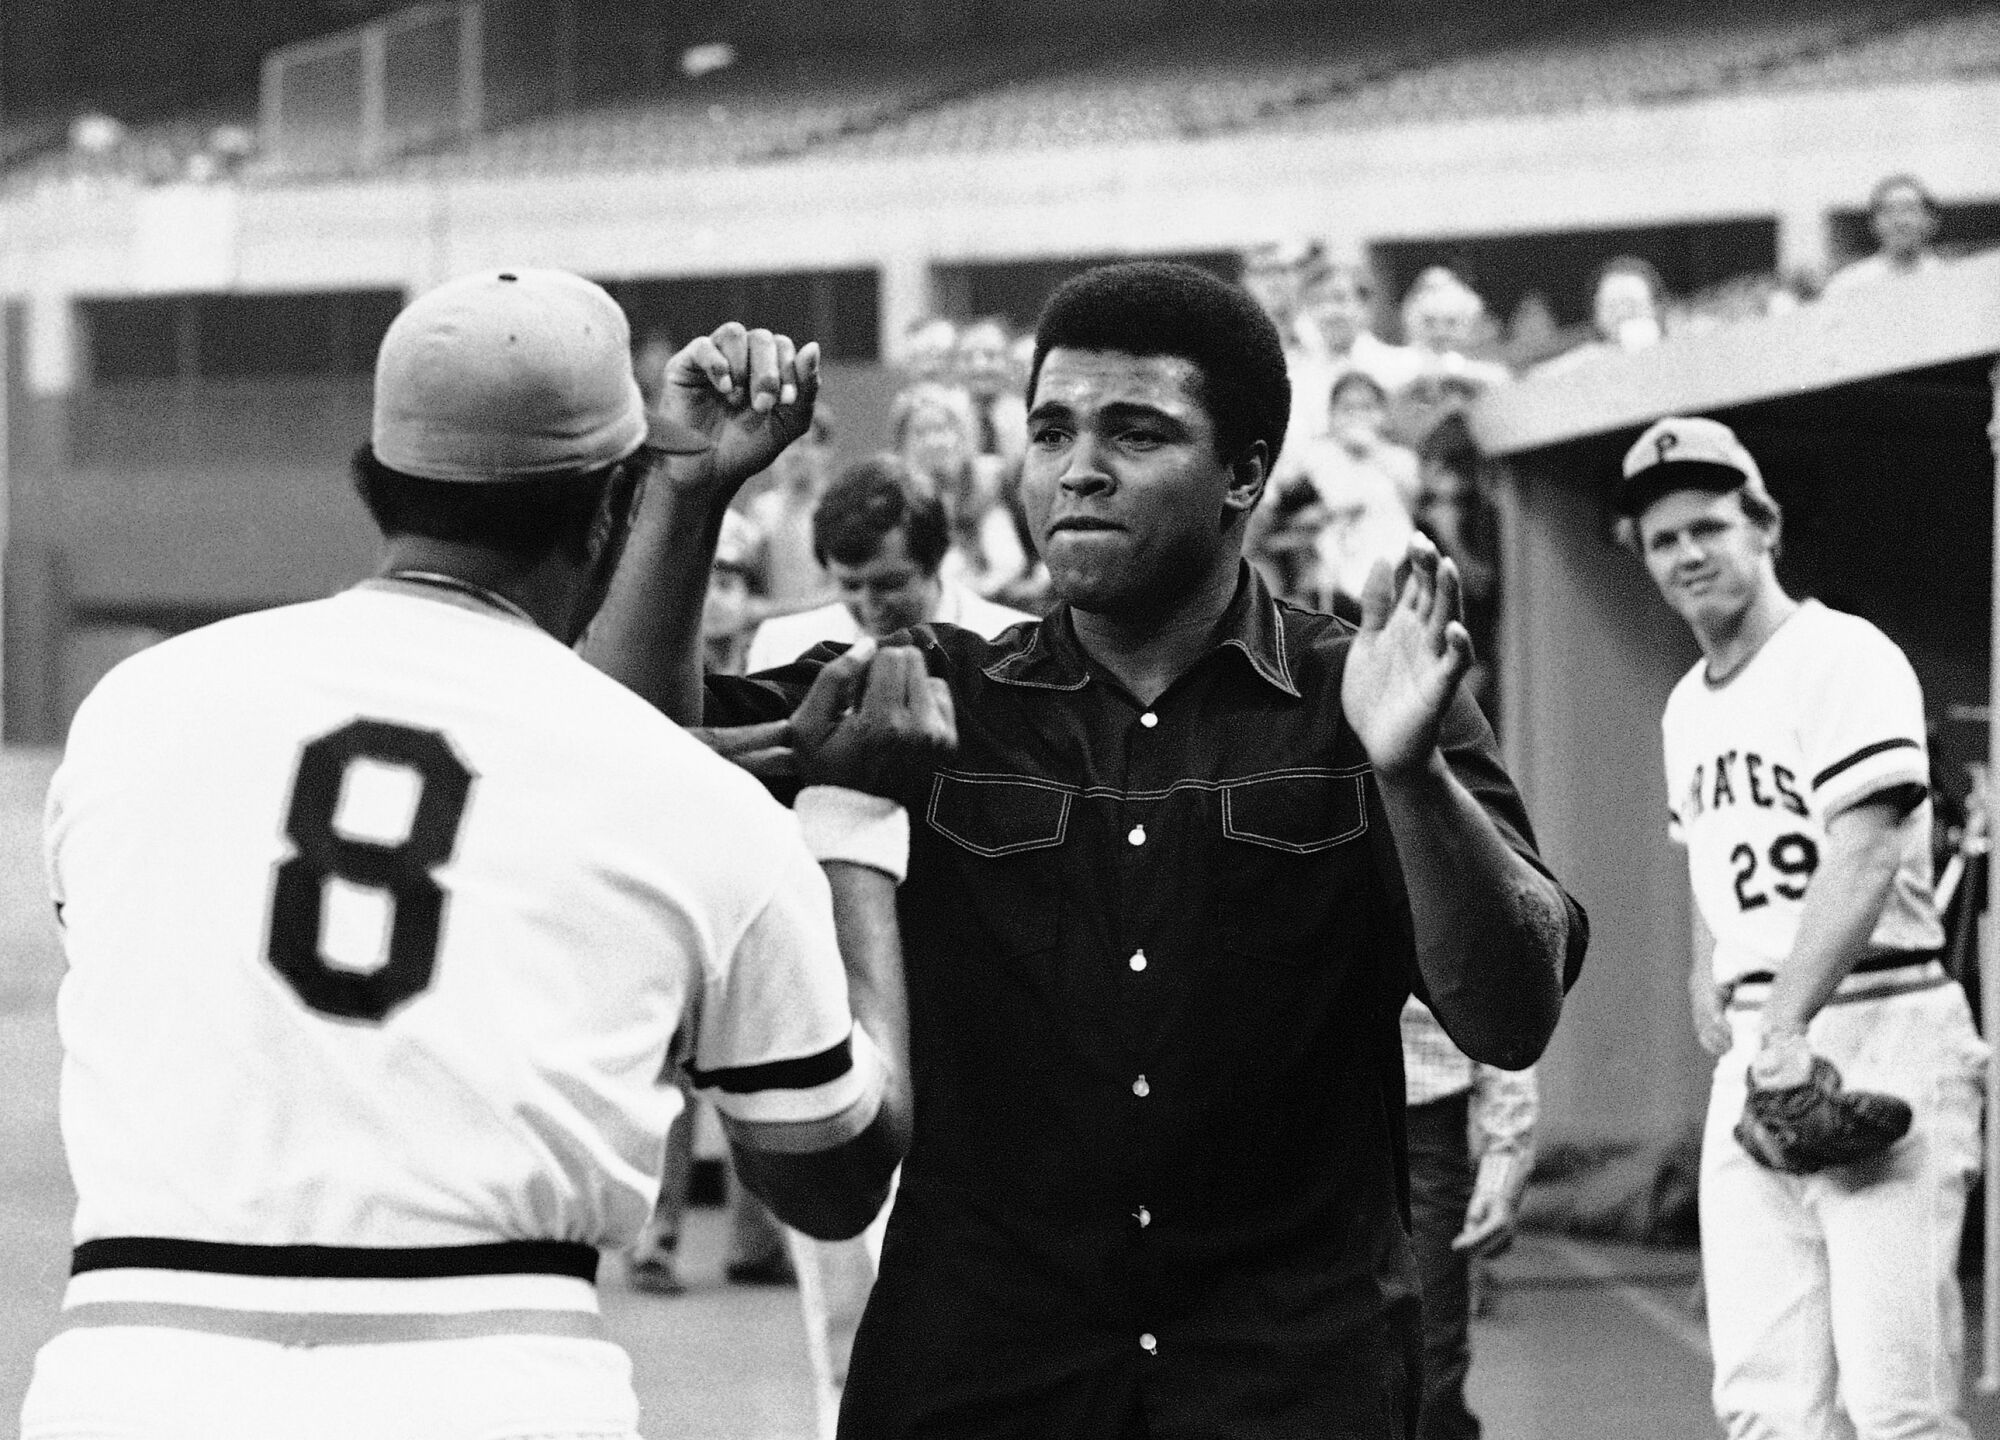 Muhammad Ali clowns with Willie Stargell on a baseball field.